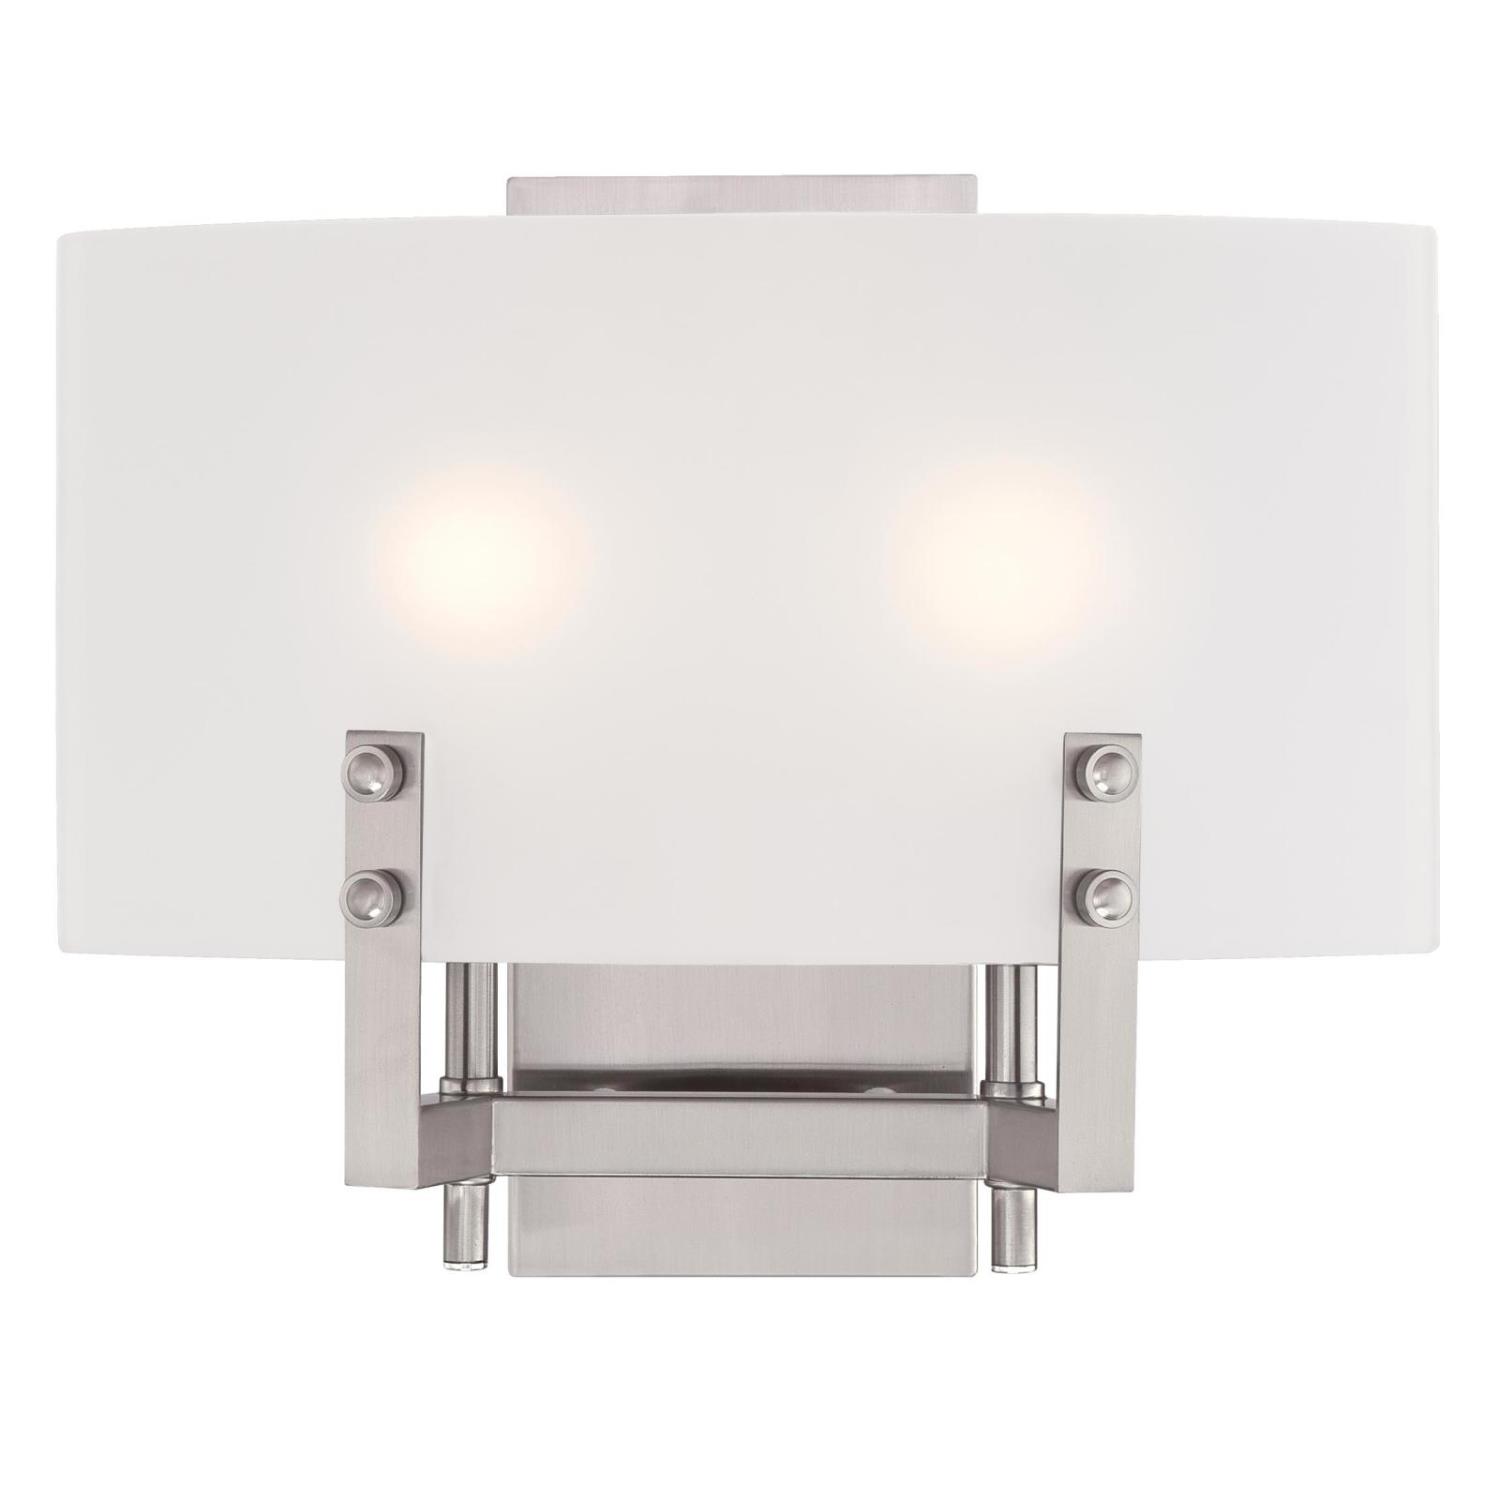 2 Light Wall Fixture Brushed Nickel Finish with Frosted Glass